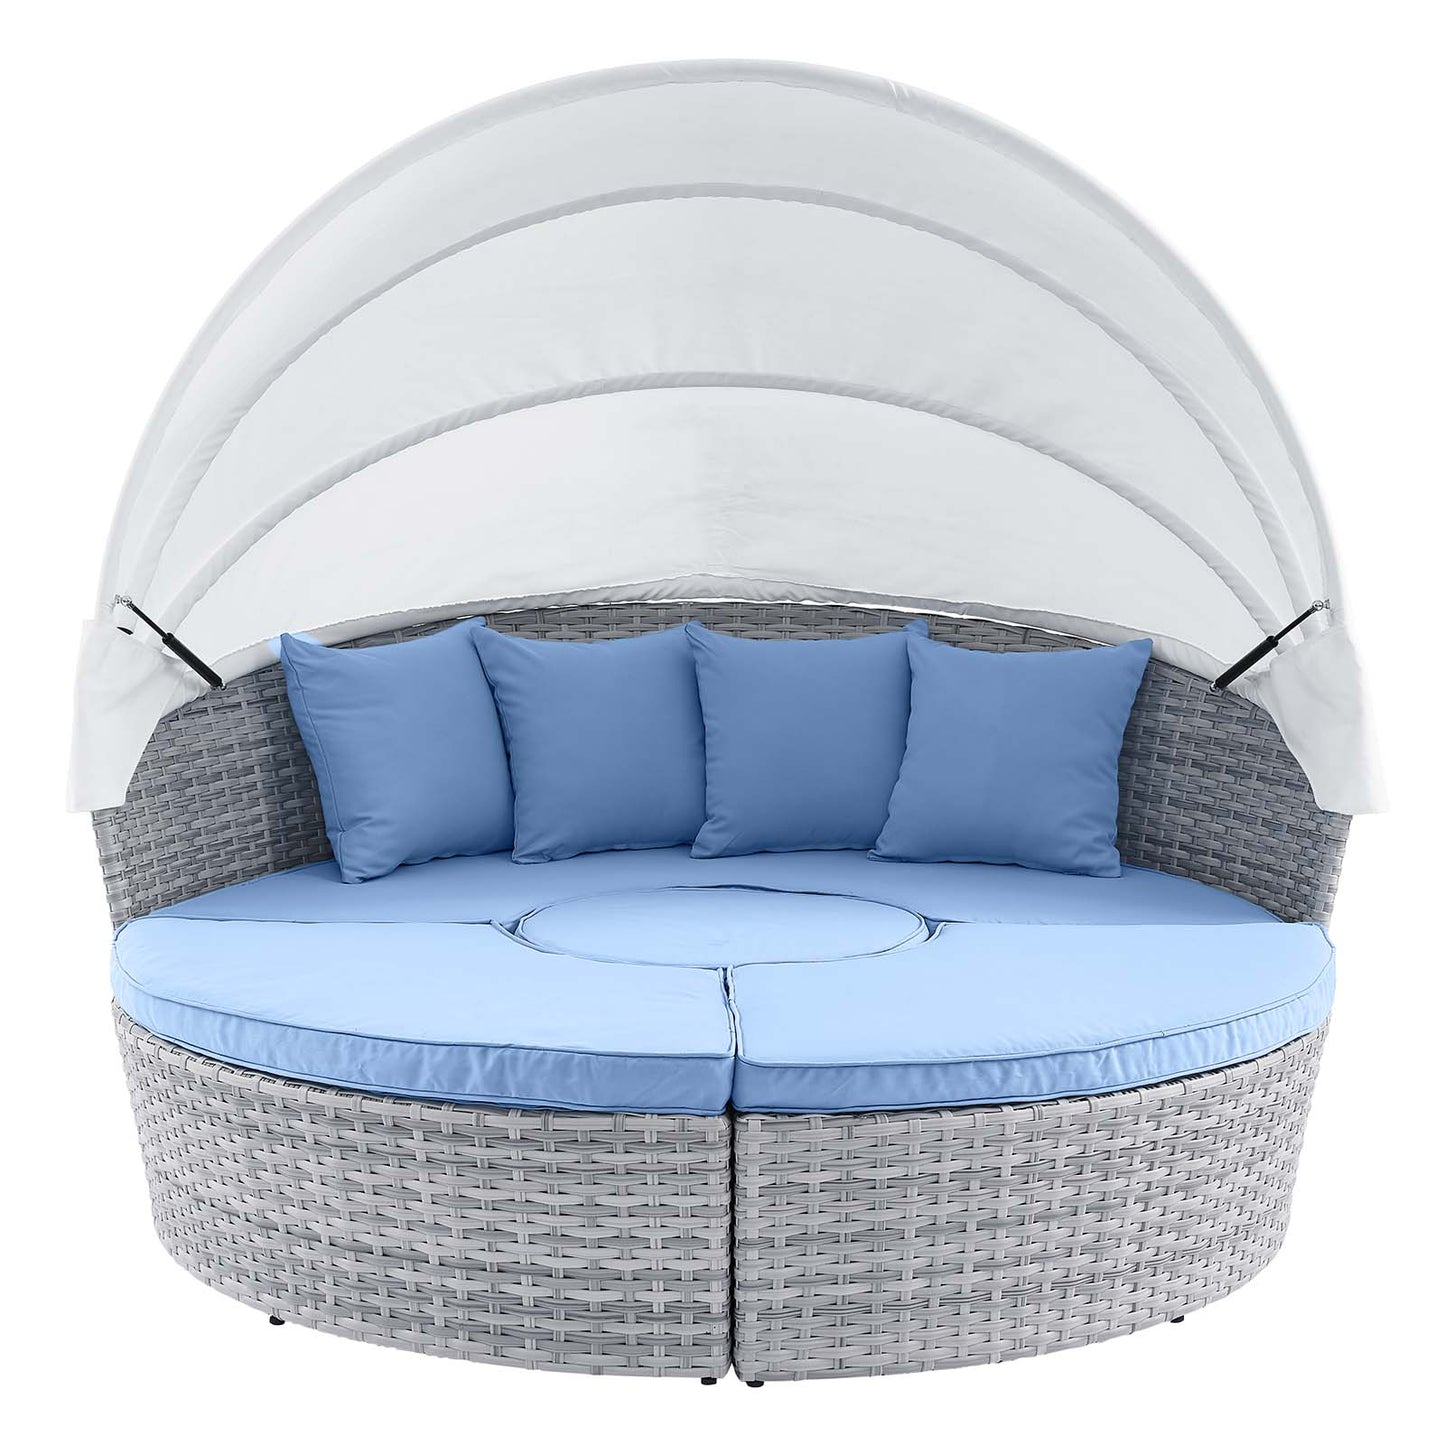 Scottsdale Canopy Outdoor Patio Daybed Light Gray Light Blue EEI-4442-LGR-LBU